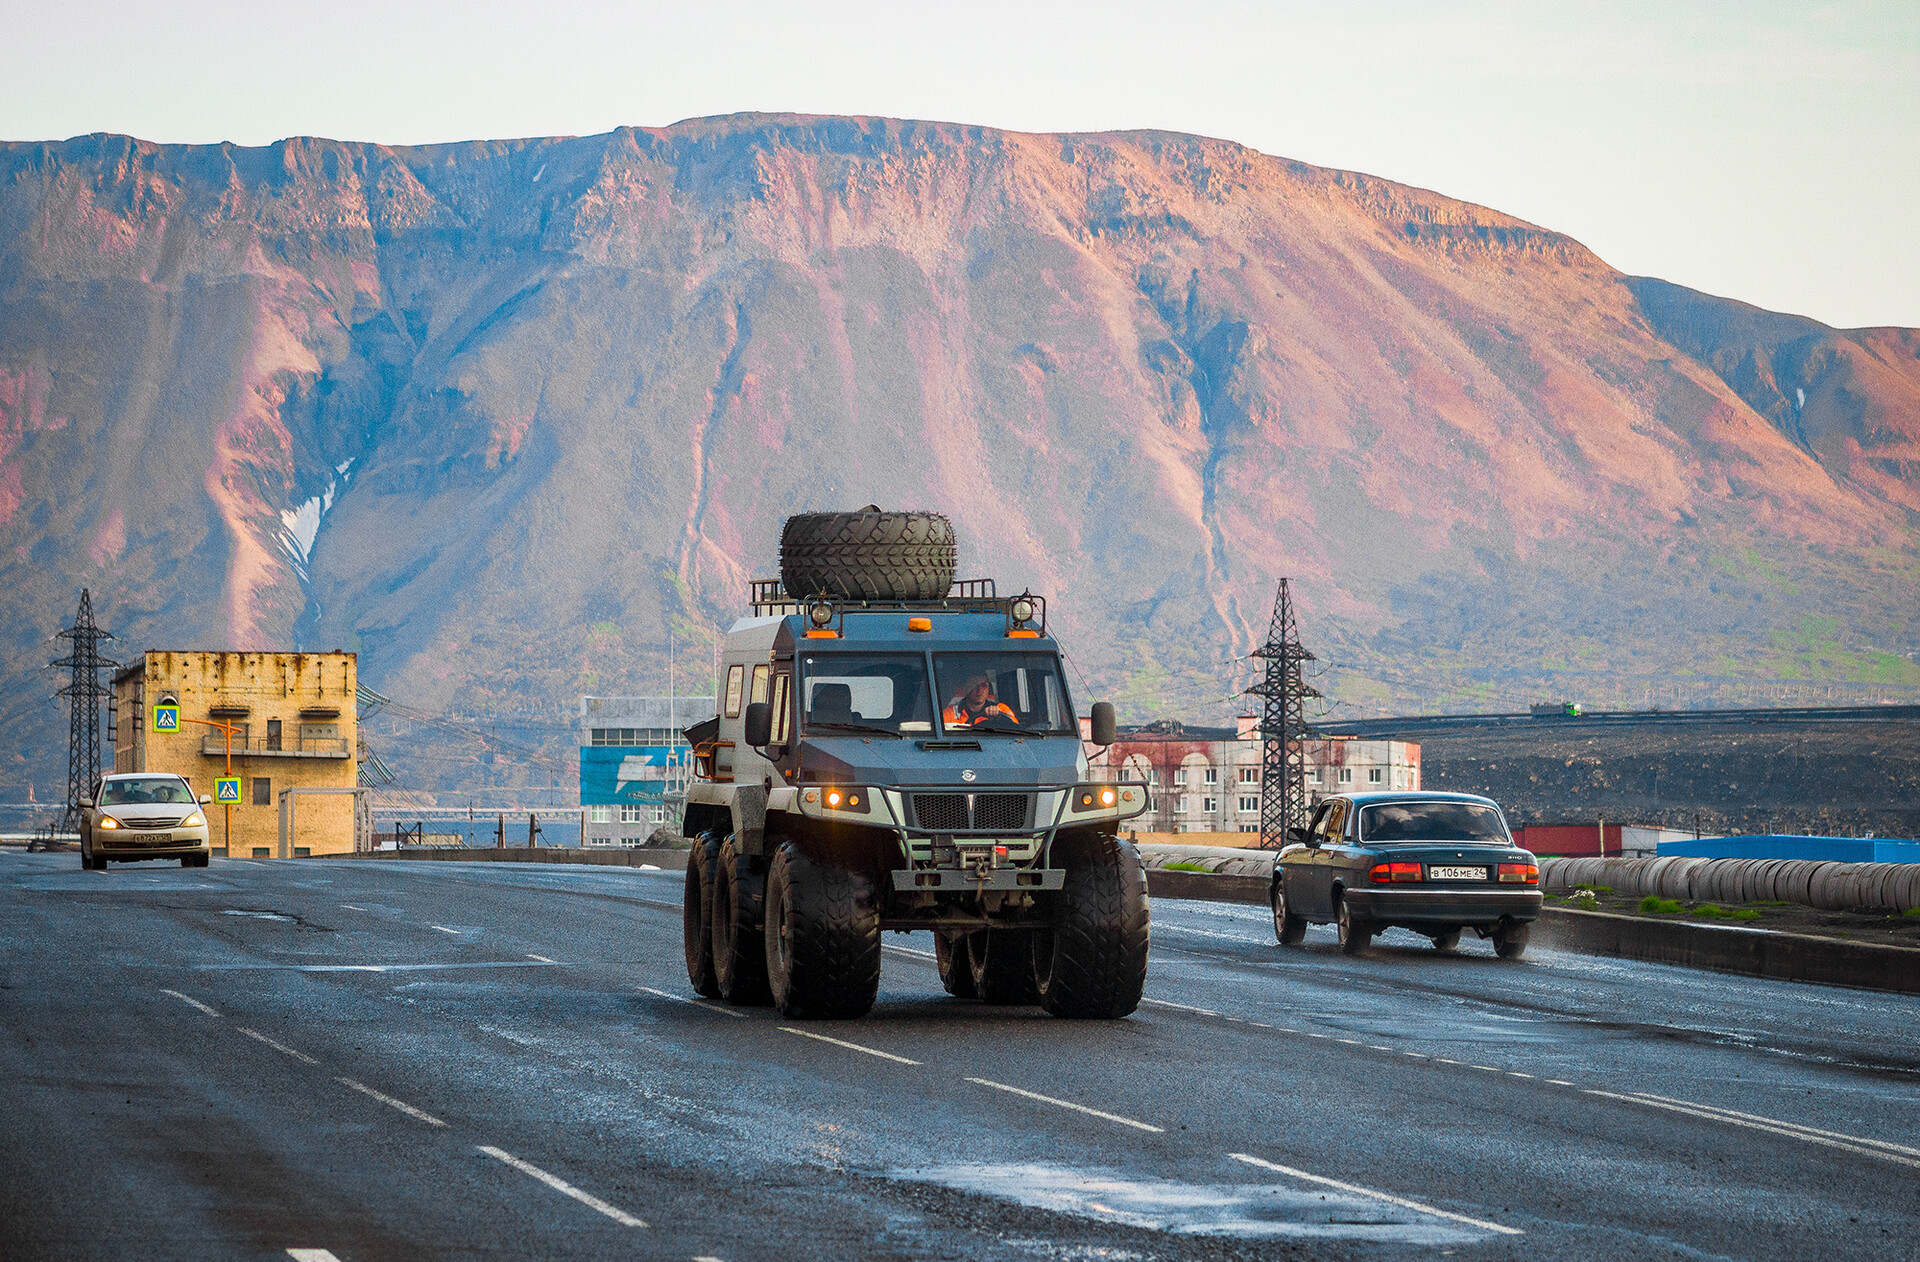 It is common to see such vehicles on the roads in Norilsk.